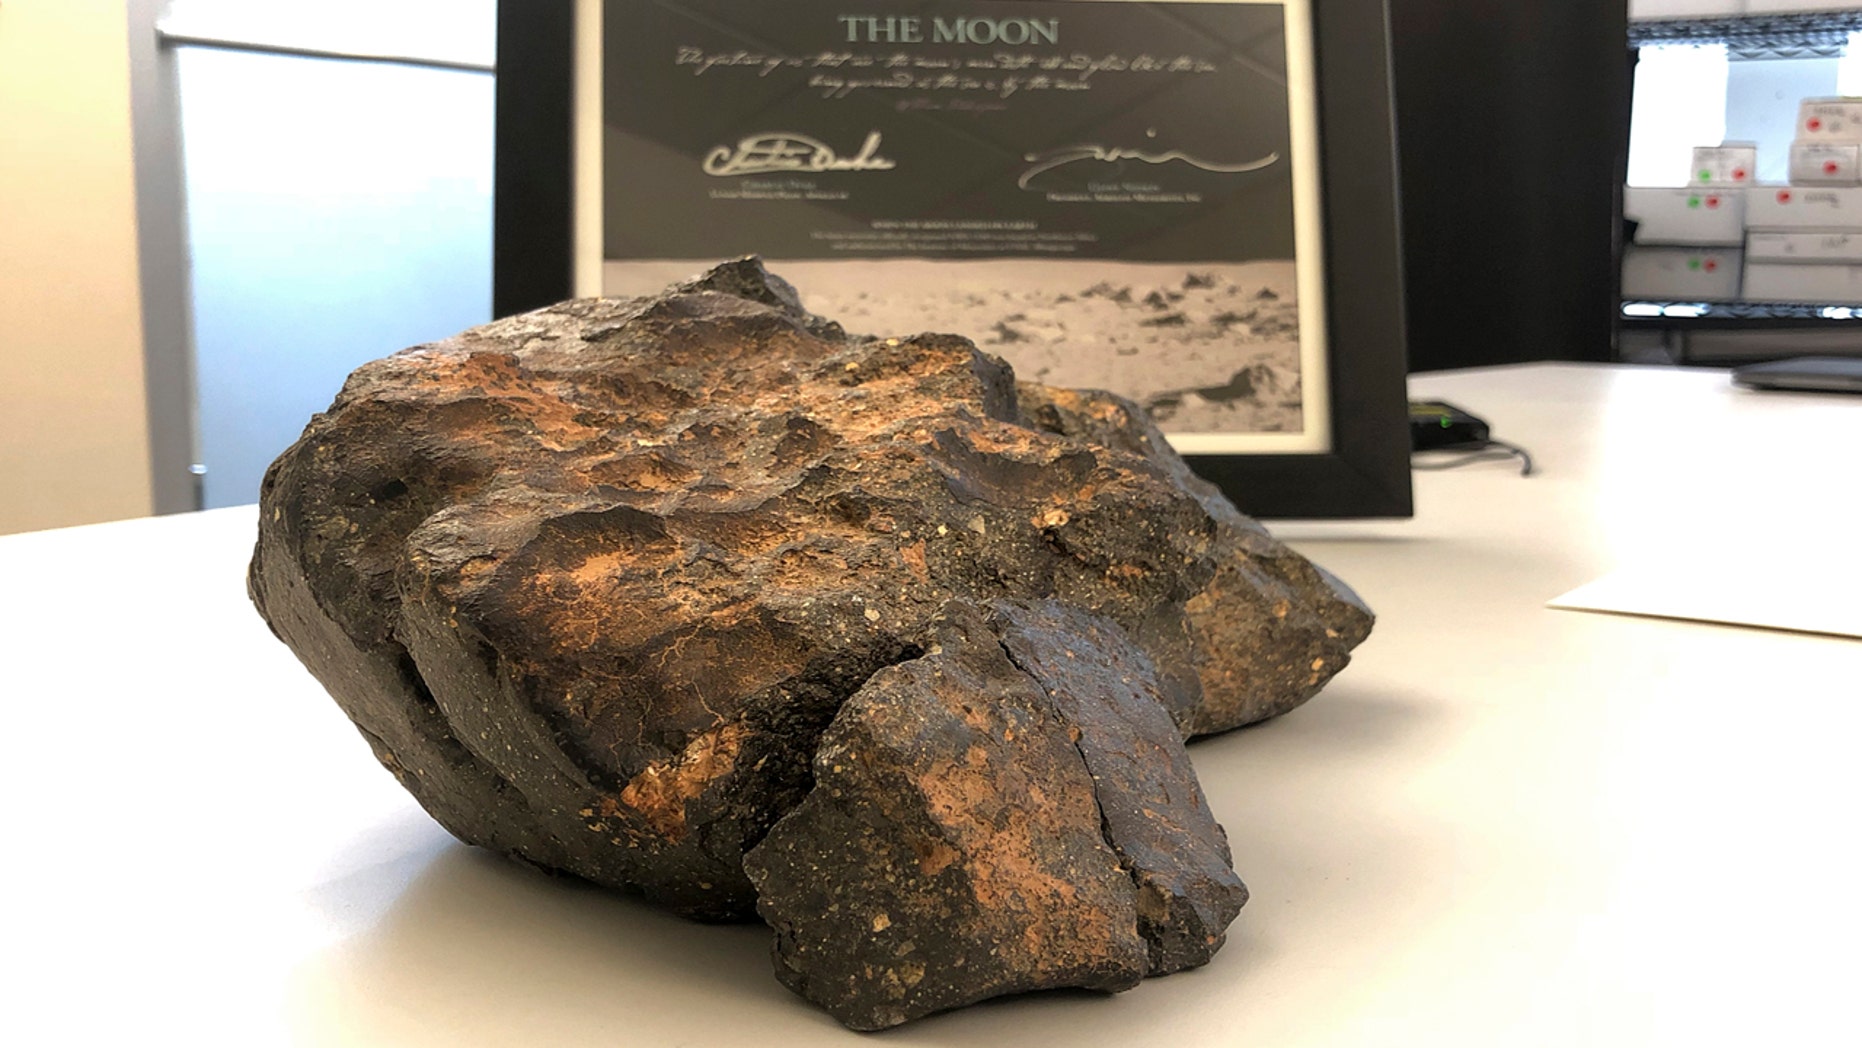 A 12-pound lunar meteorite found in northwestern Africa in 2017 rests on a table in Amherst, N.H.